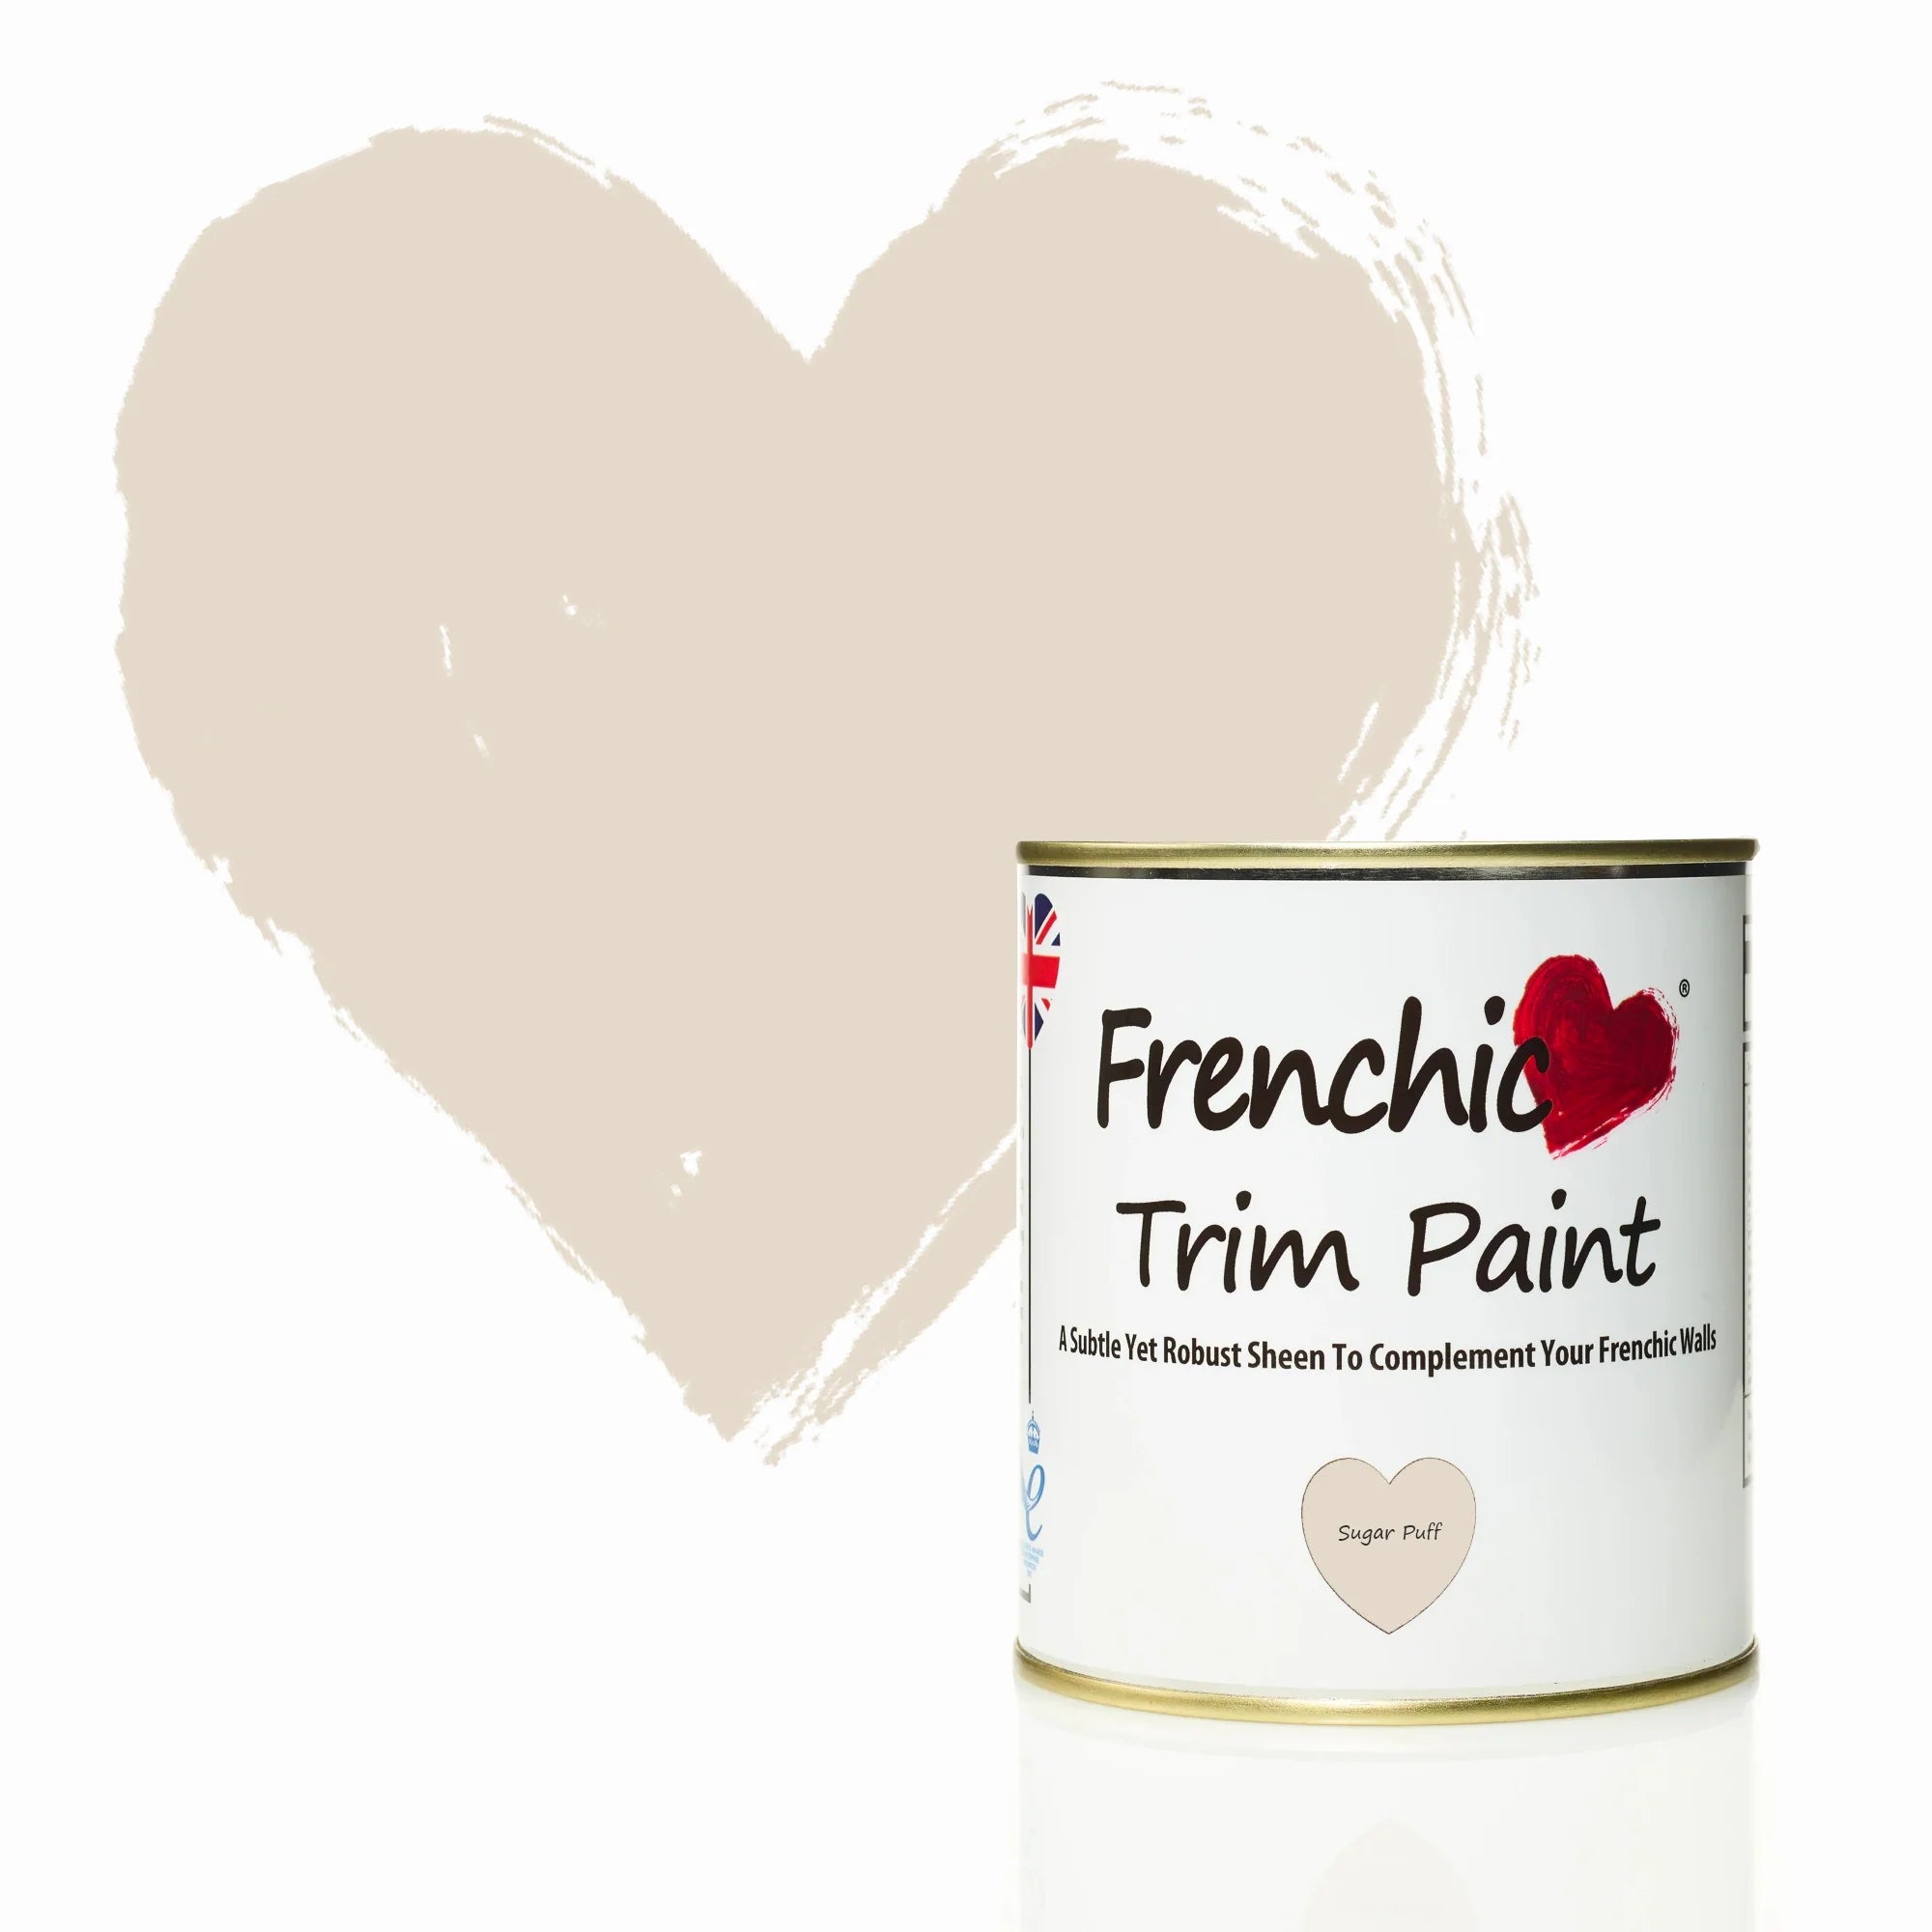 Frenchic Paint Sugar Puff Trim Paint Frenchic Paint Trim Paint Range by Weirs of Baggot Street Irelands Largest and most Trusted Stockist of Frenchic Paint. Shop online for Nationwide and Same Day Dublin Delivery